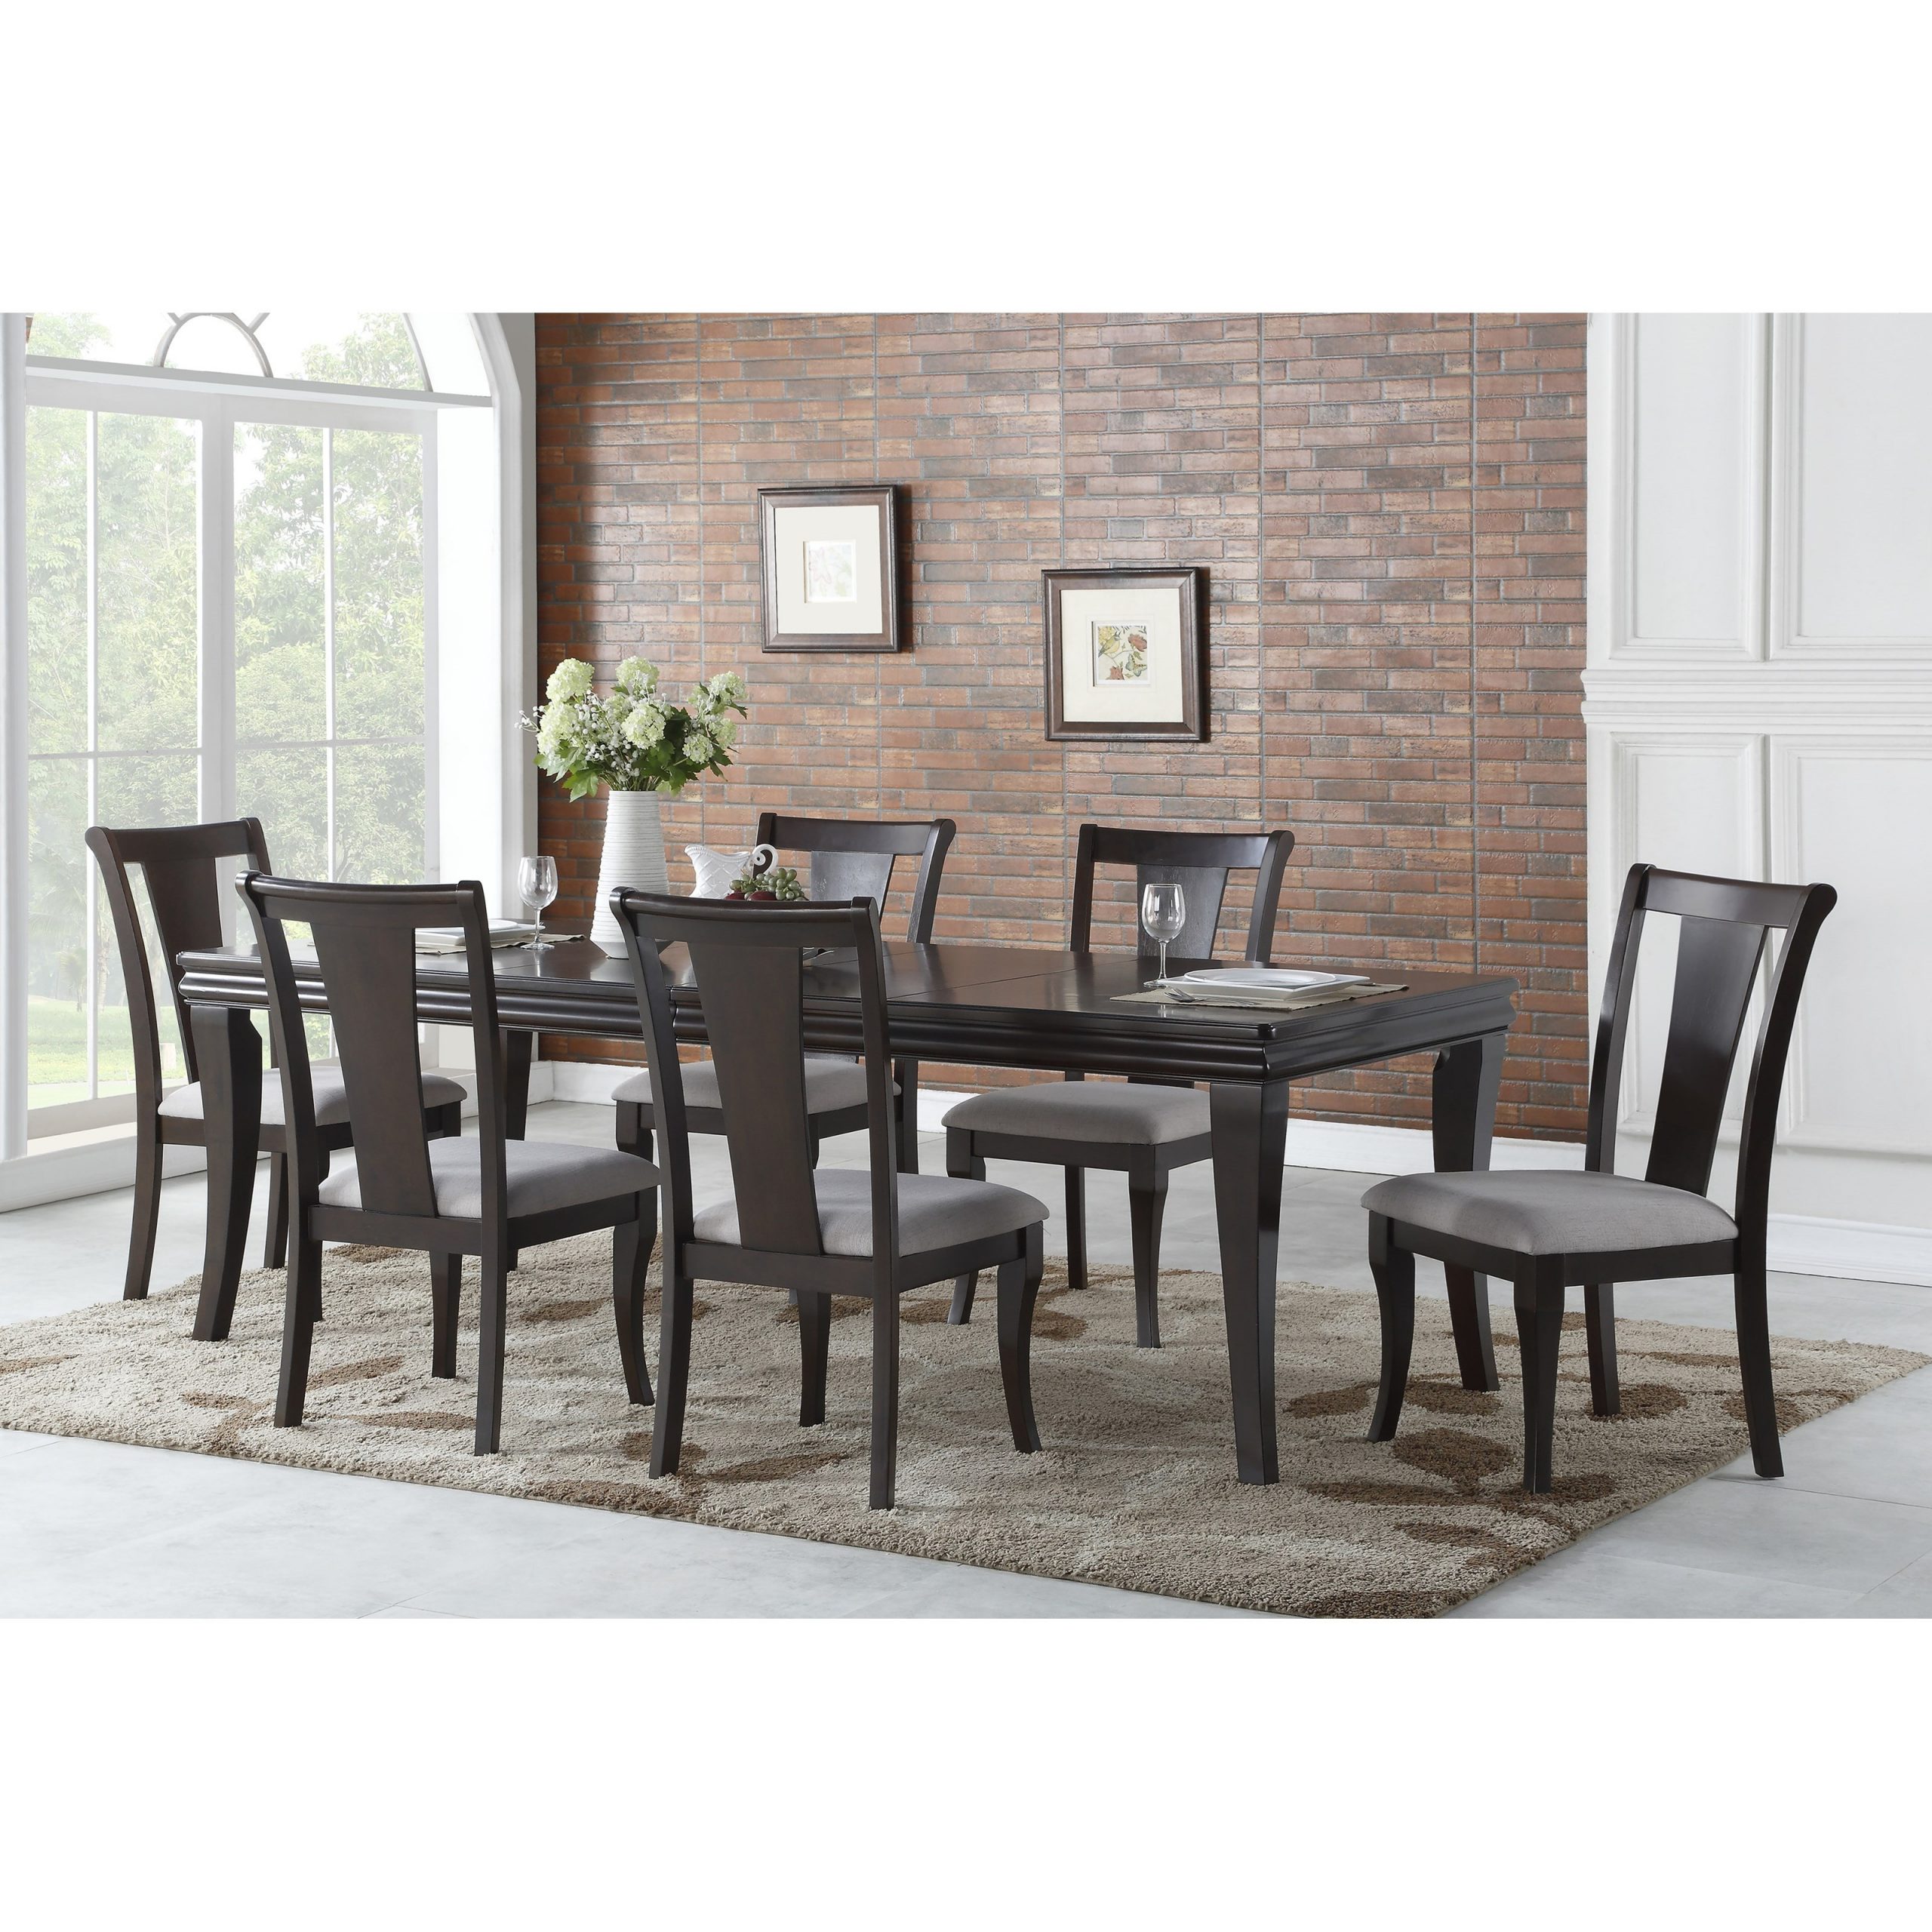 Steve Silver Aubrey Transitional Dining Room Set Northeast for size 3200 X 3200